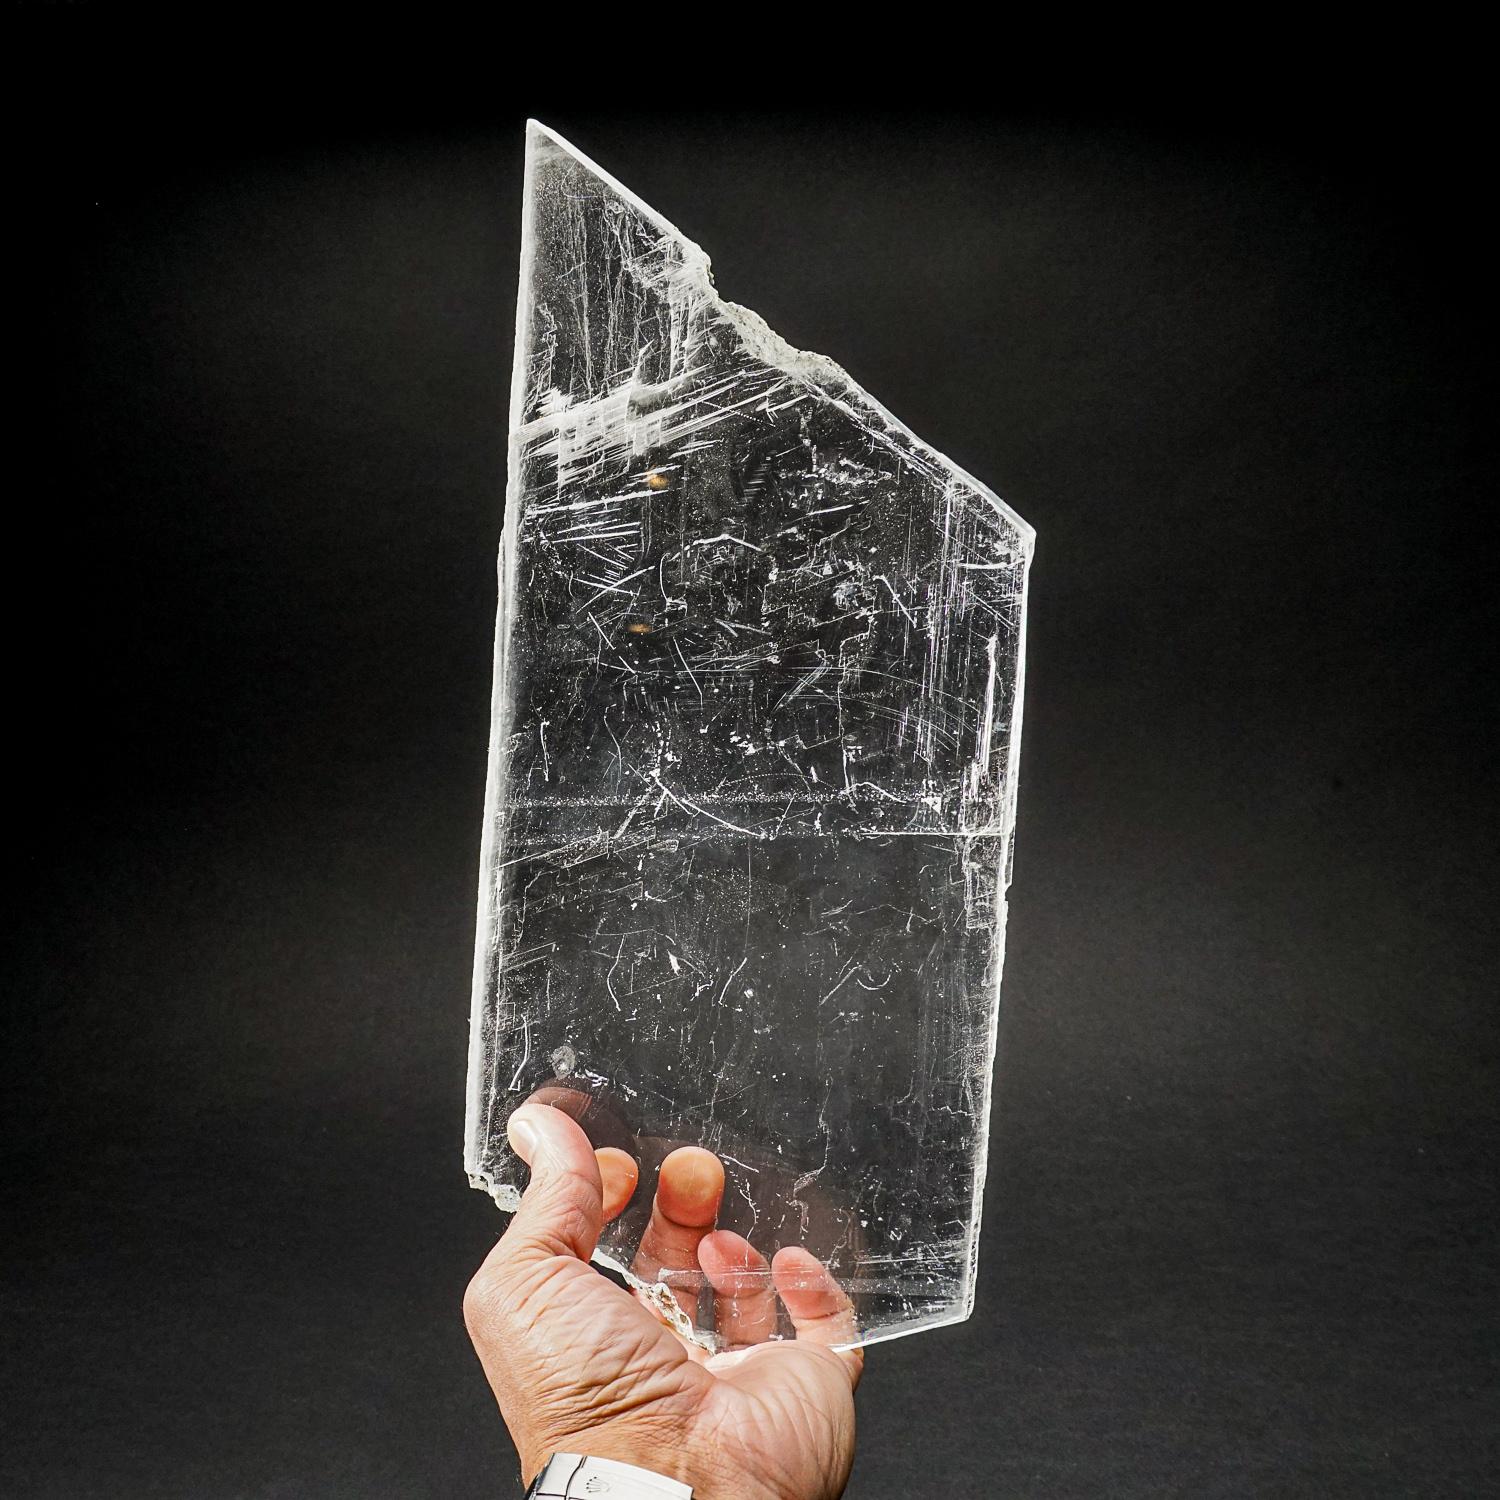 Large optical, water-clear crystal of selenite with clean, lustrous surfaces. The crystal is doubly terminated, with sugary white micro crystals coating one termination. It has an impressive structure and symmetry fashioned by the Earth, making it